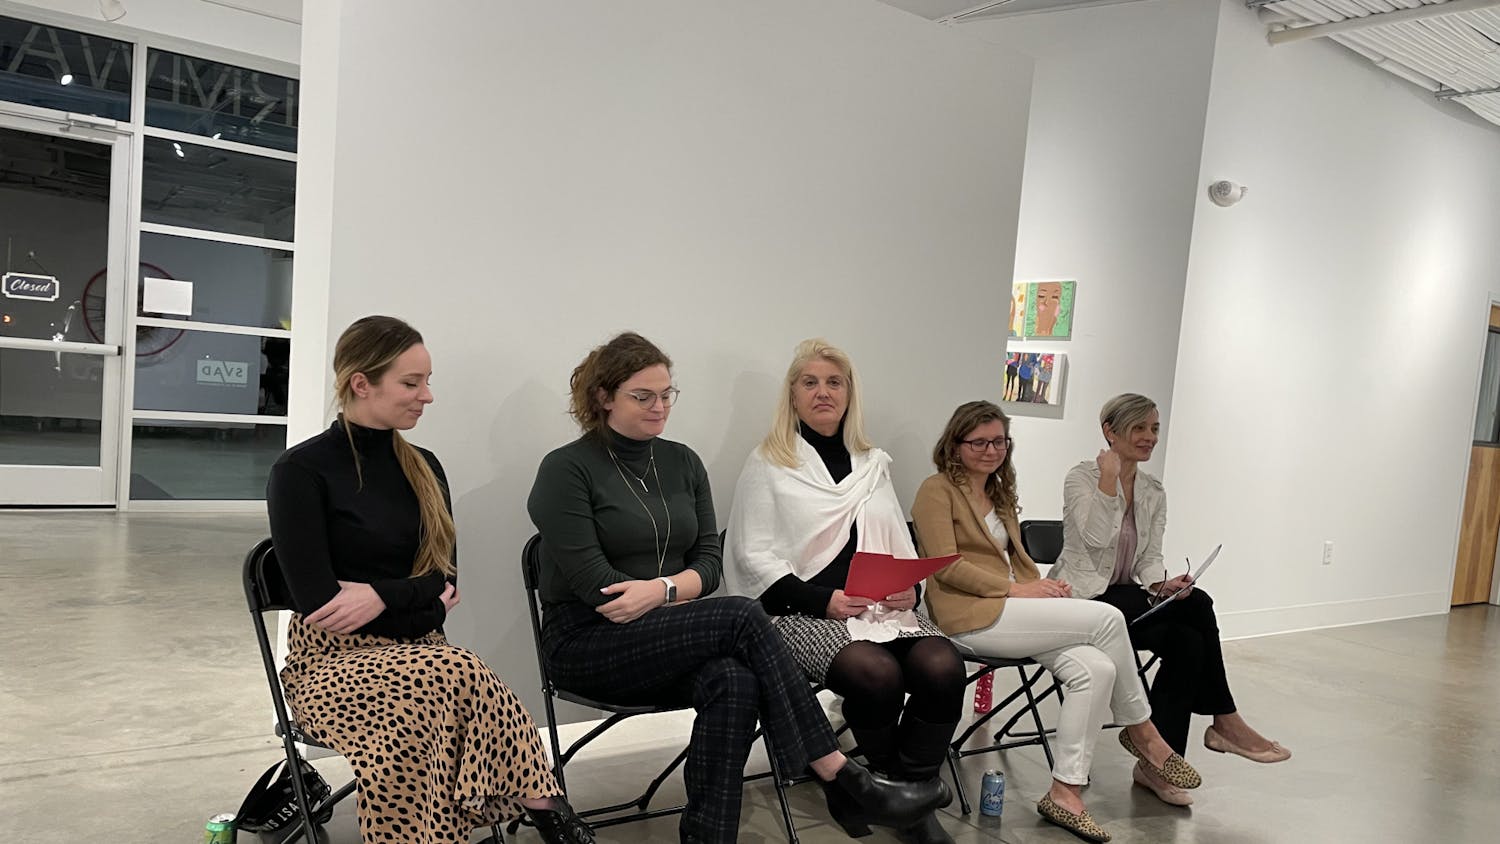 A panel of experts speak at the "Girls Speak" event at Stormwater Studios on Jan. 19, 2023. The event showcased the artwork juvenile offenders.